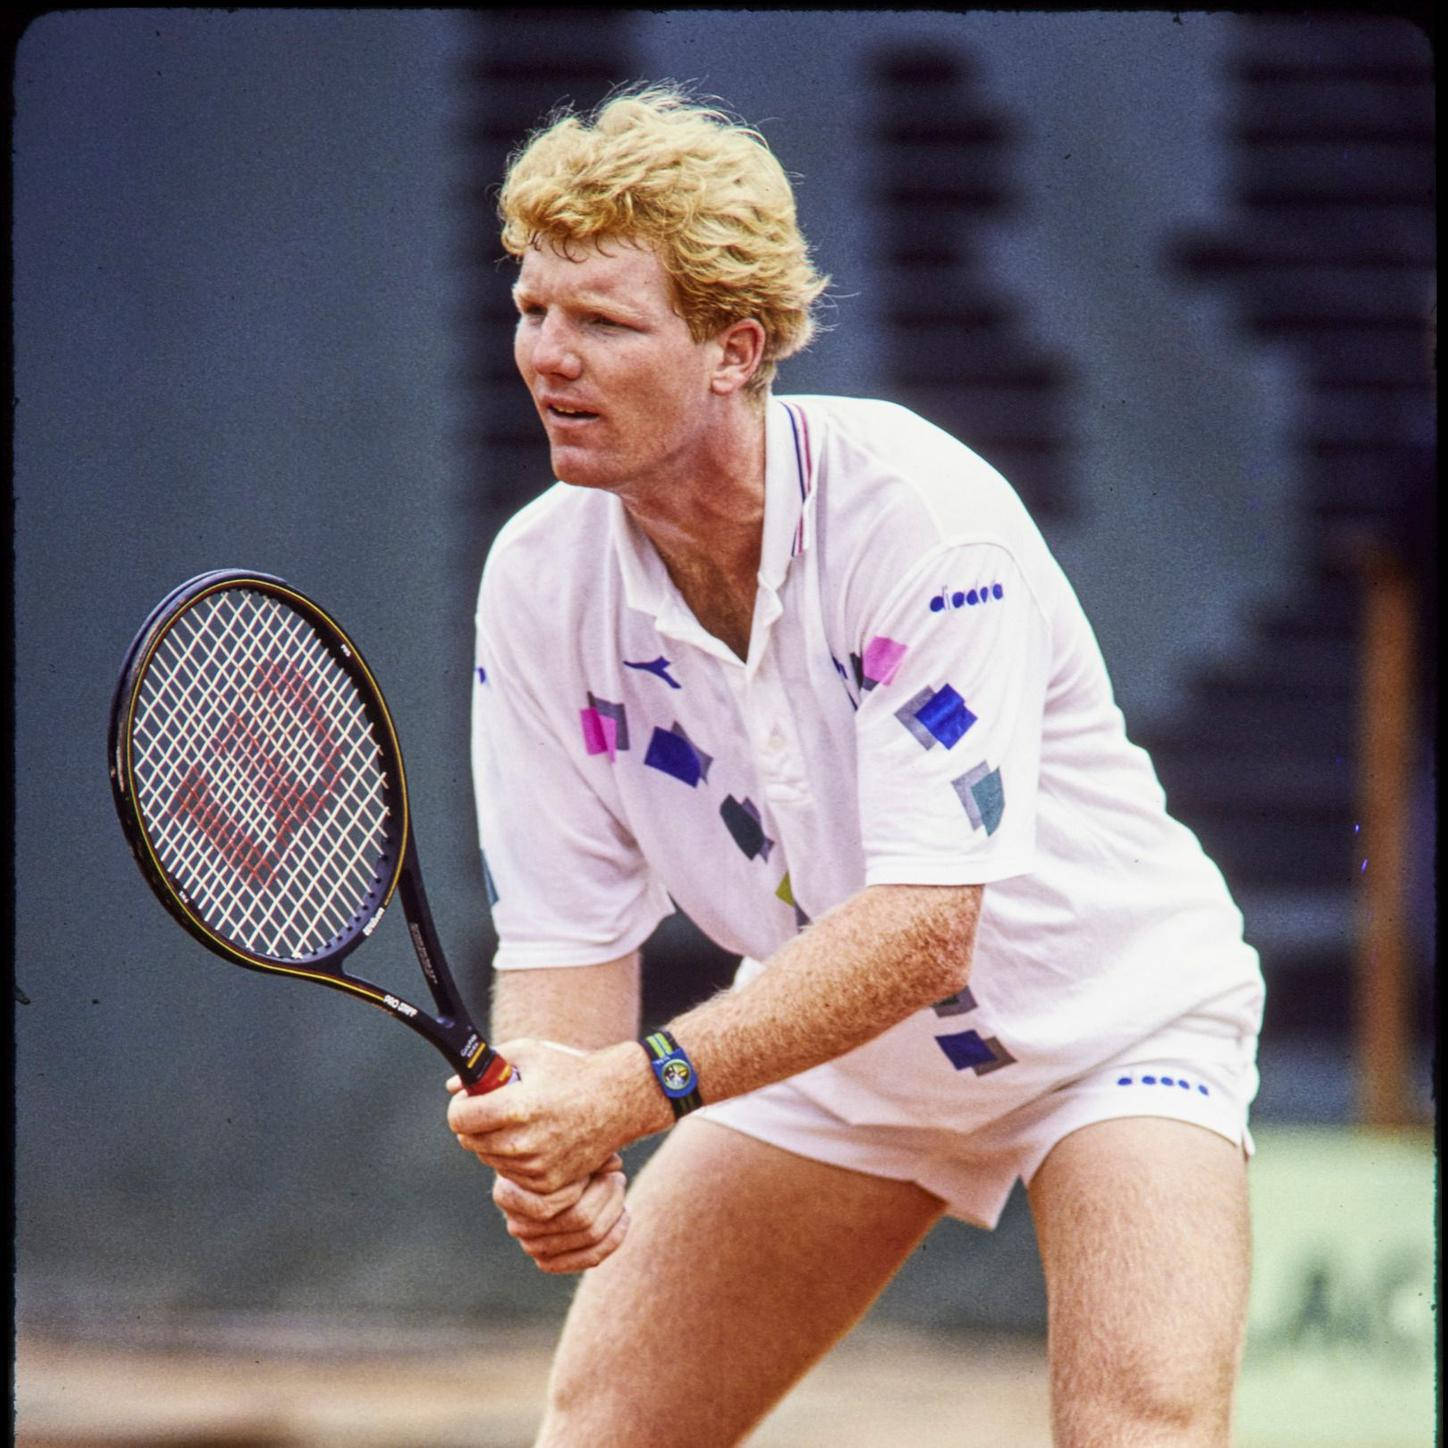 "Tennis Legend Jim Courier in Action at Indian Wells" Wallpaper